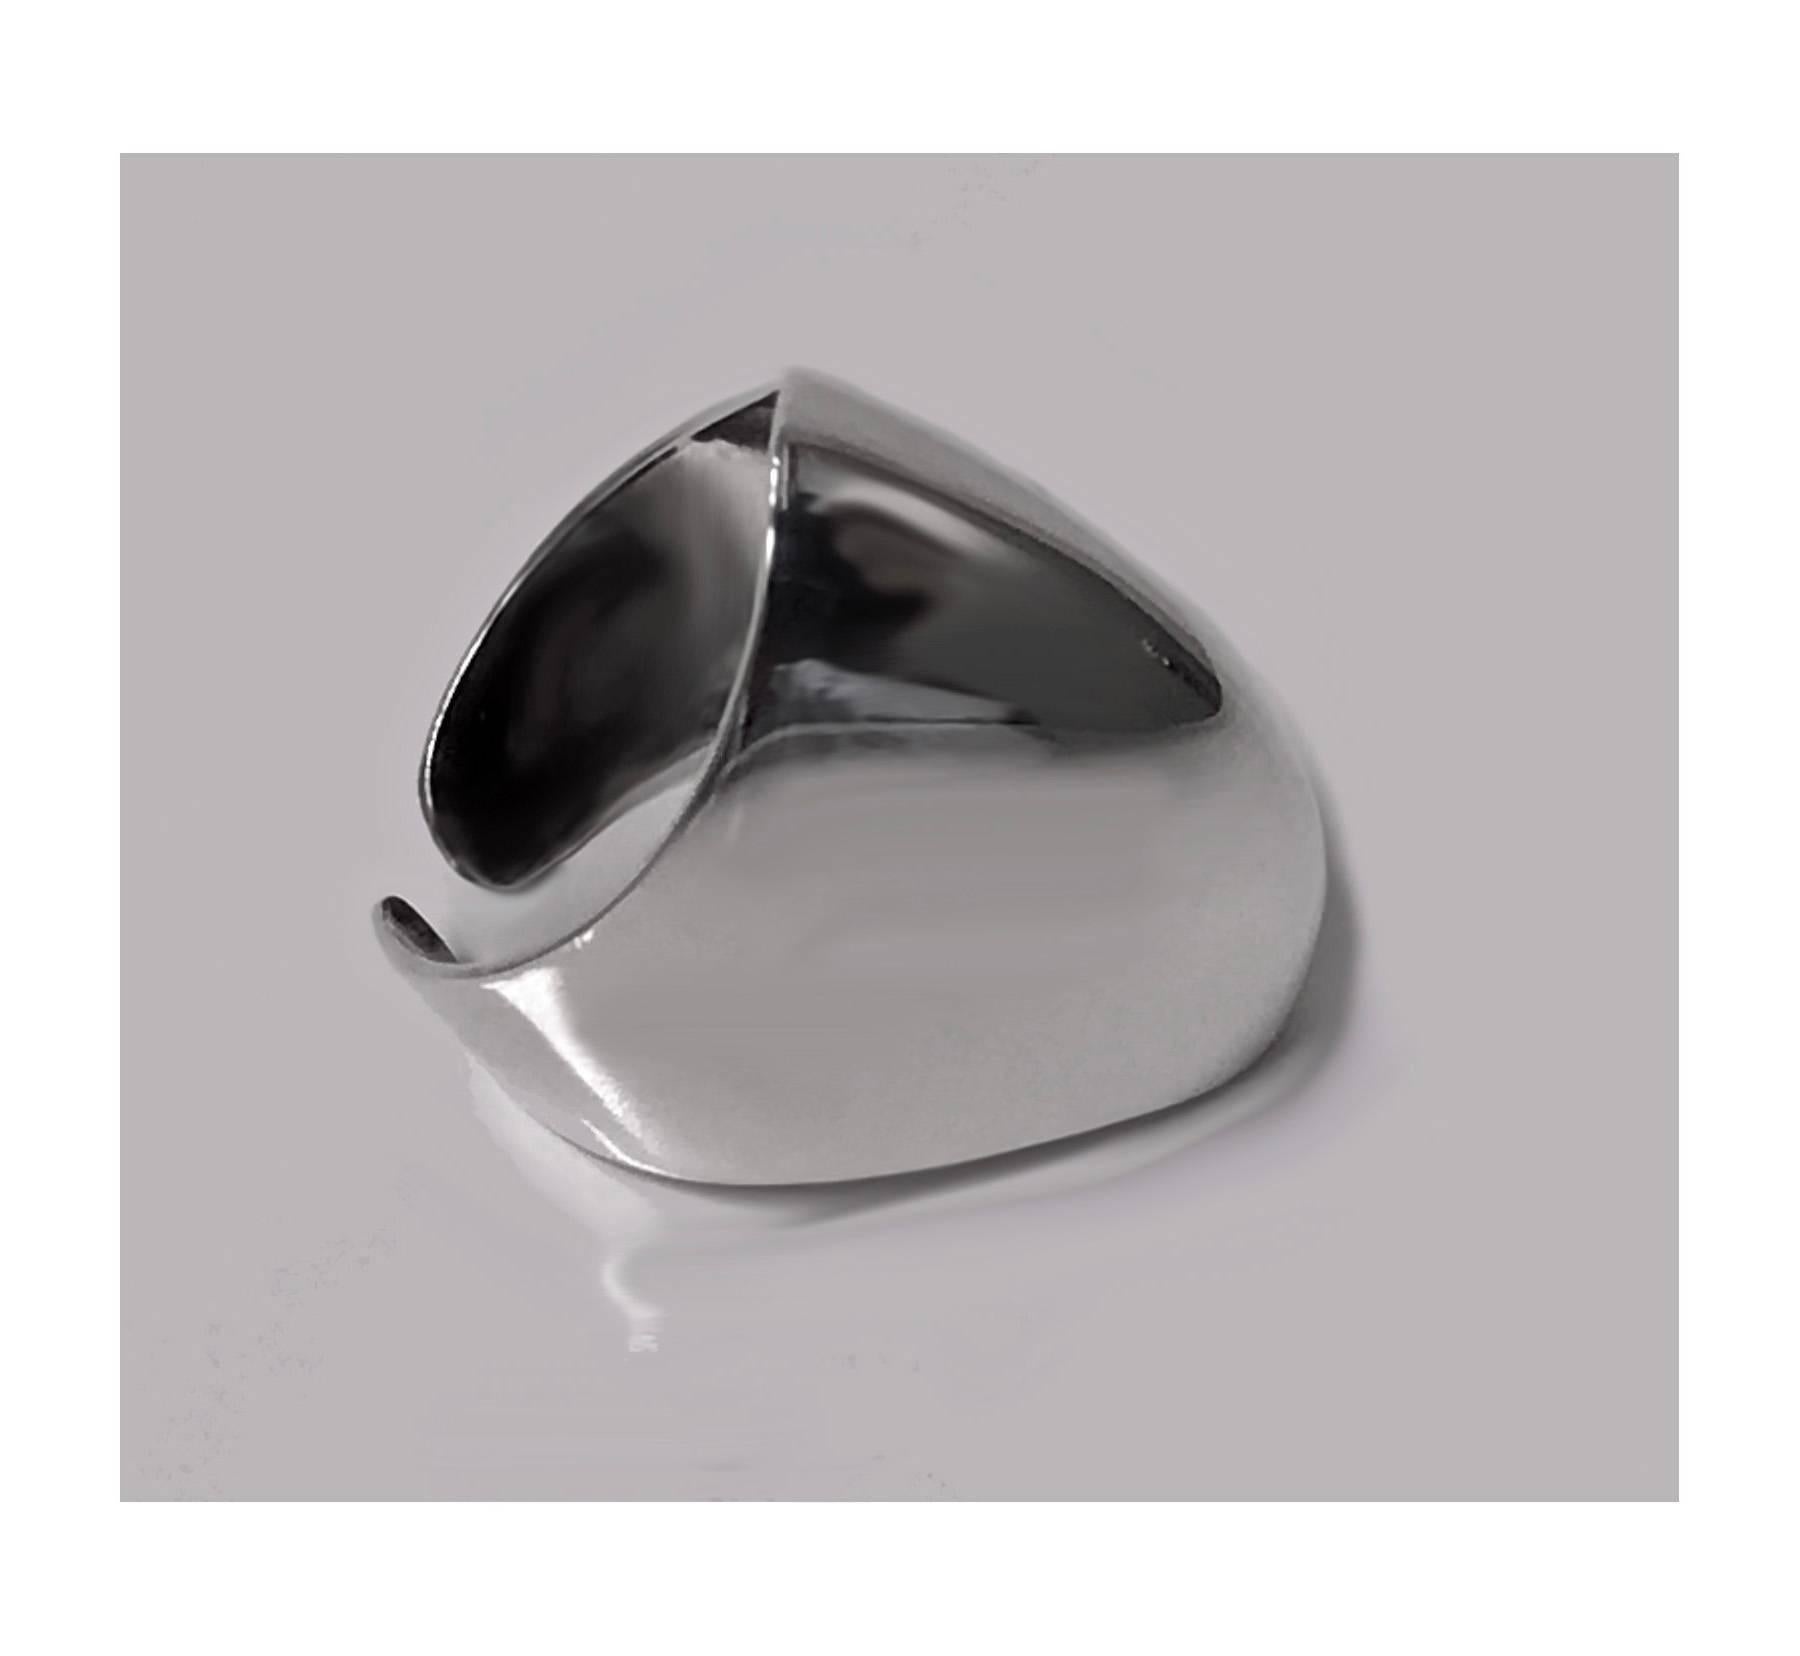 Bent Knudsen Danish Sterling mid 20th century large plain polished ovoid abstract Ring, design 56 signed Bent K. Item Weight: 6.8 gm. Ring Size: 7-8 Condition: good. Black reflections from photography only. 